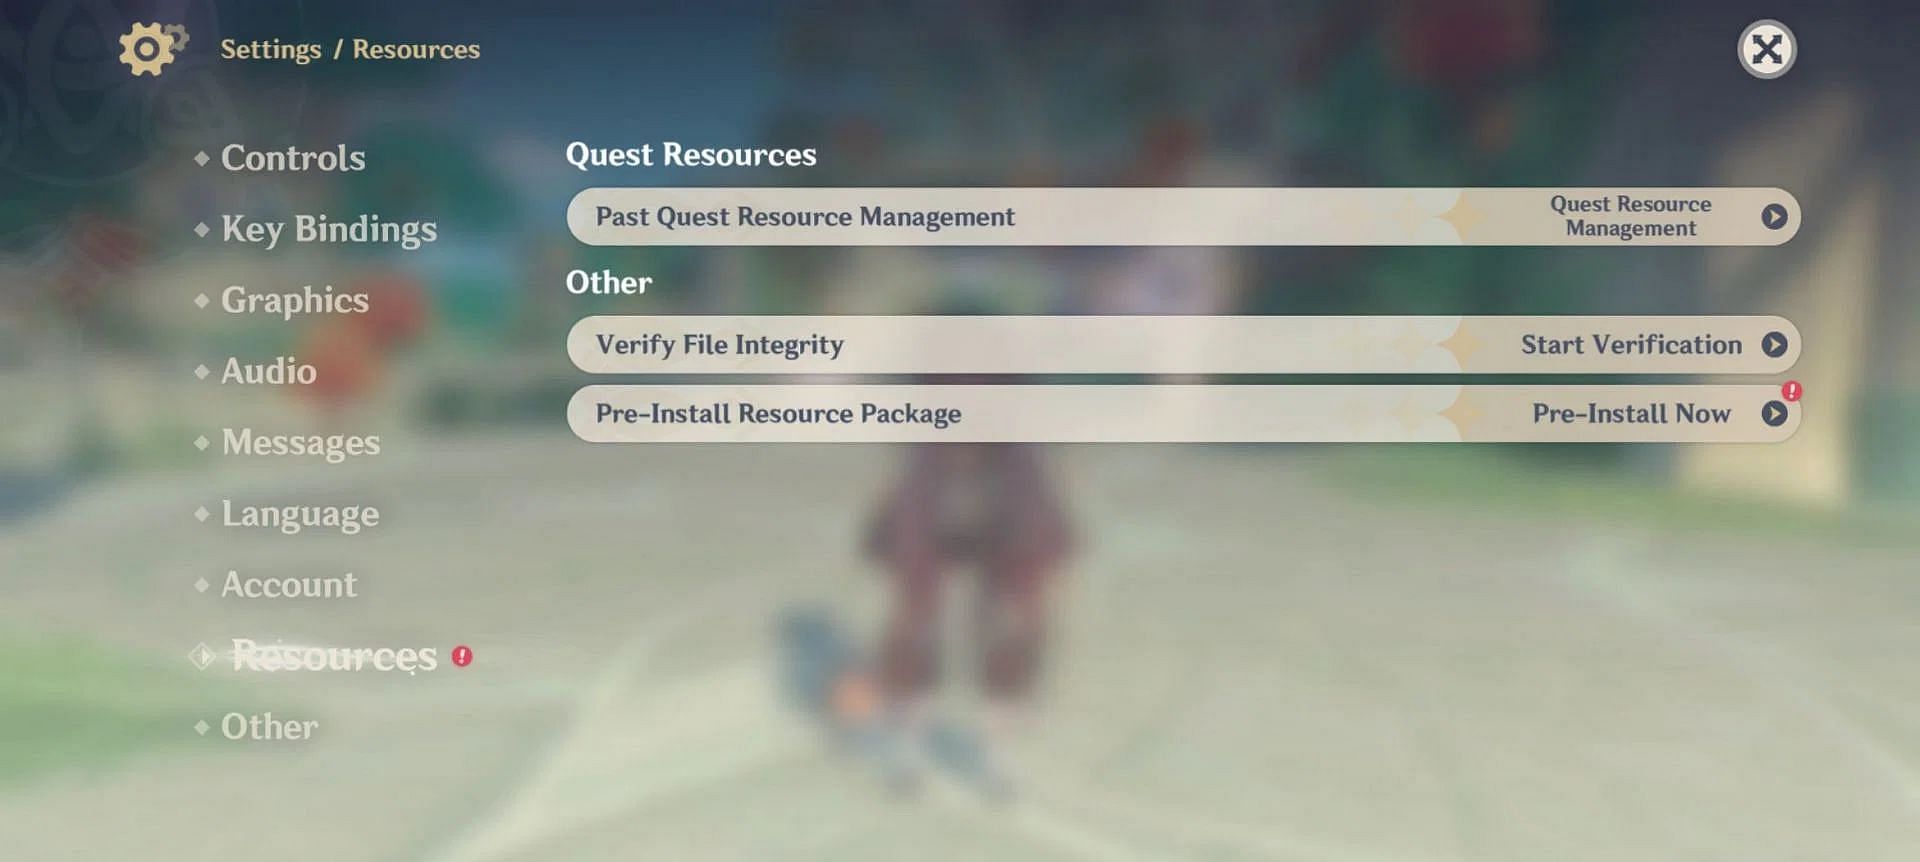 Pre-install Resource Package via the in-game setting (Image via HoYoverse)